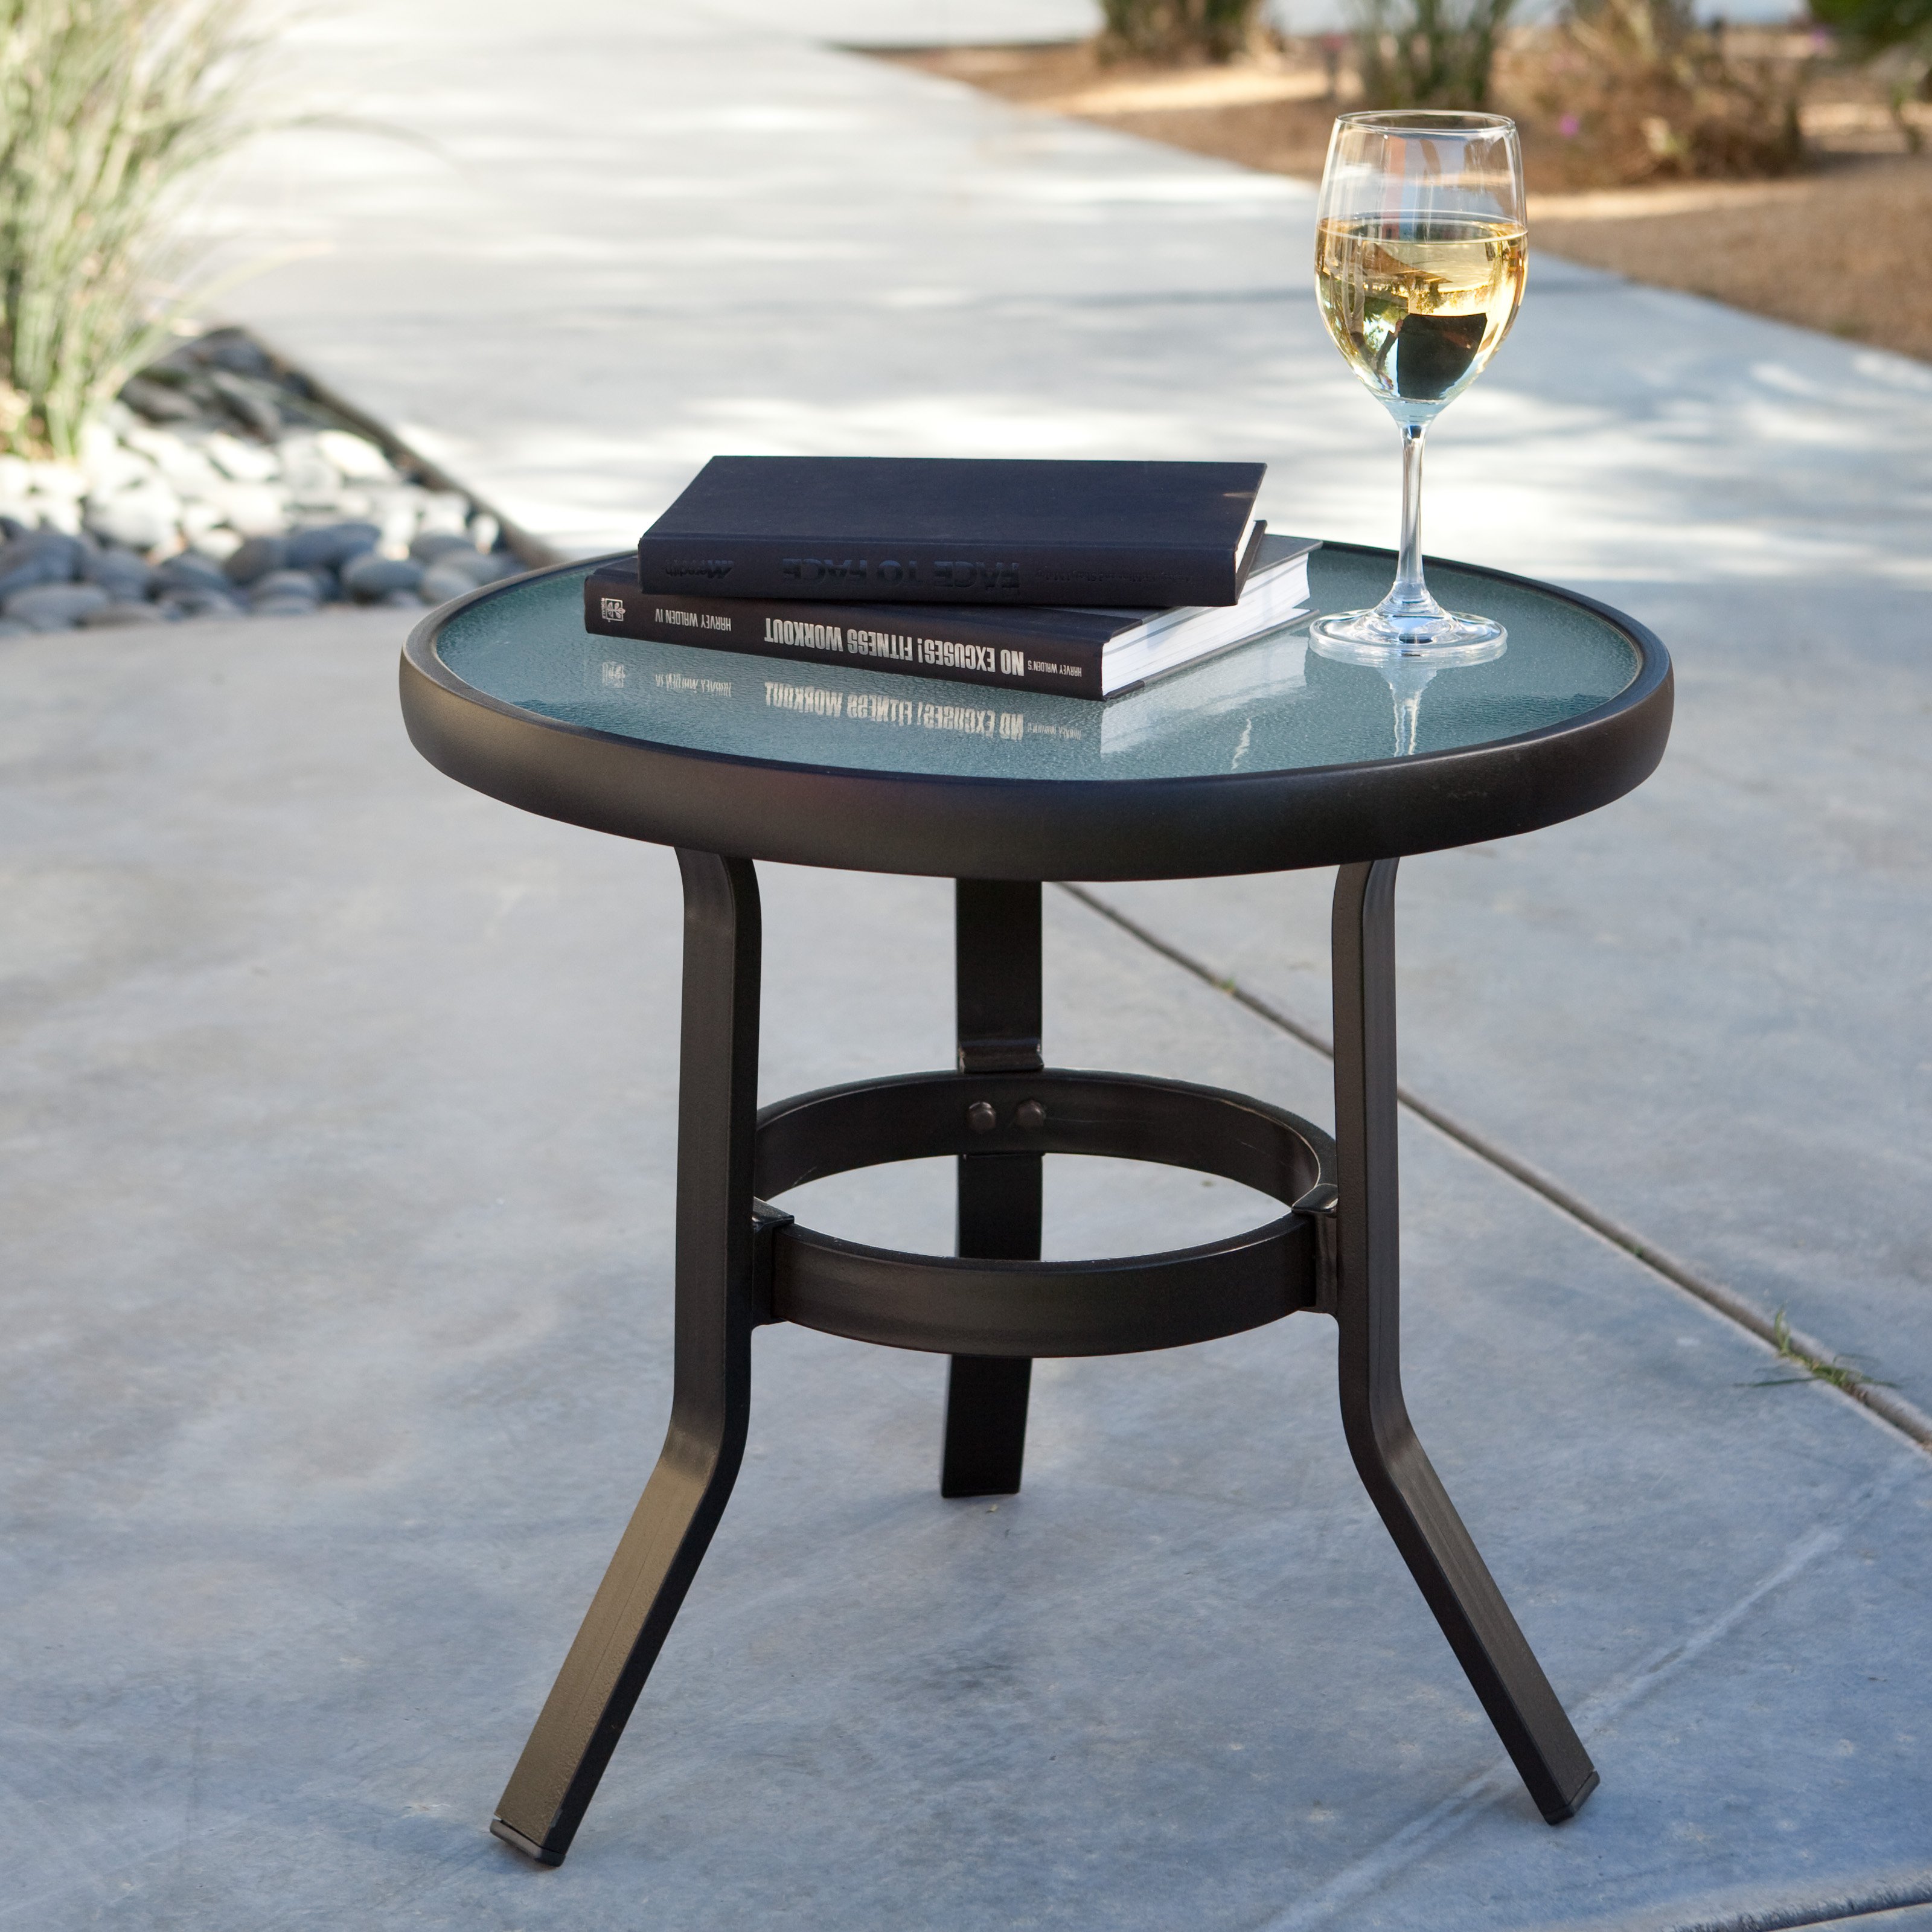 metal tire tables glass outdoor clearance crosley wilson small fisher canadian side round patio vintage retro red top table target furniture glamorous accent full size pier coupon